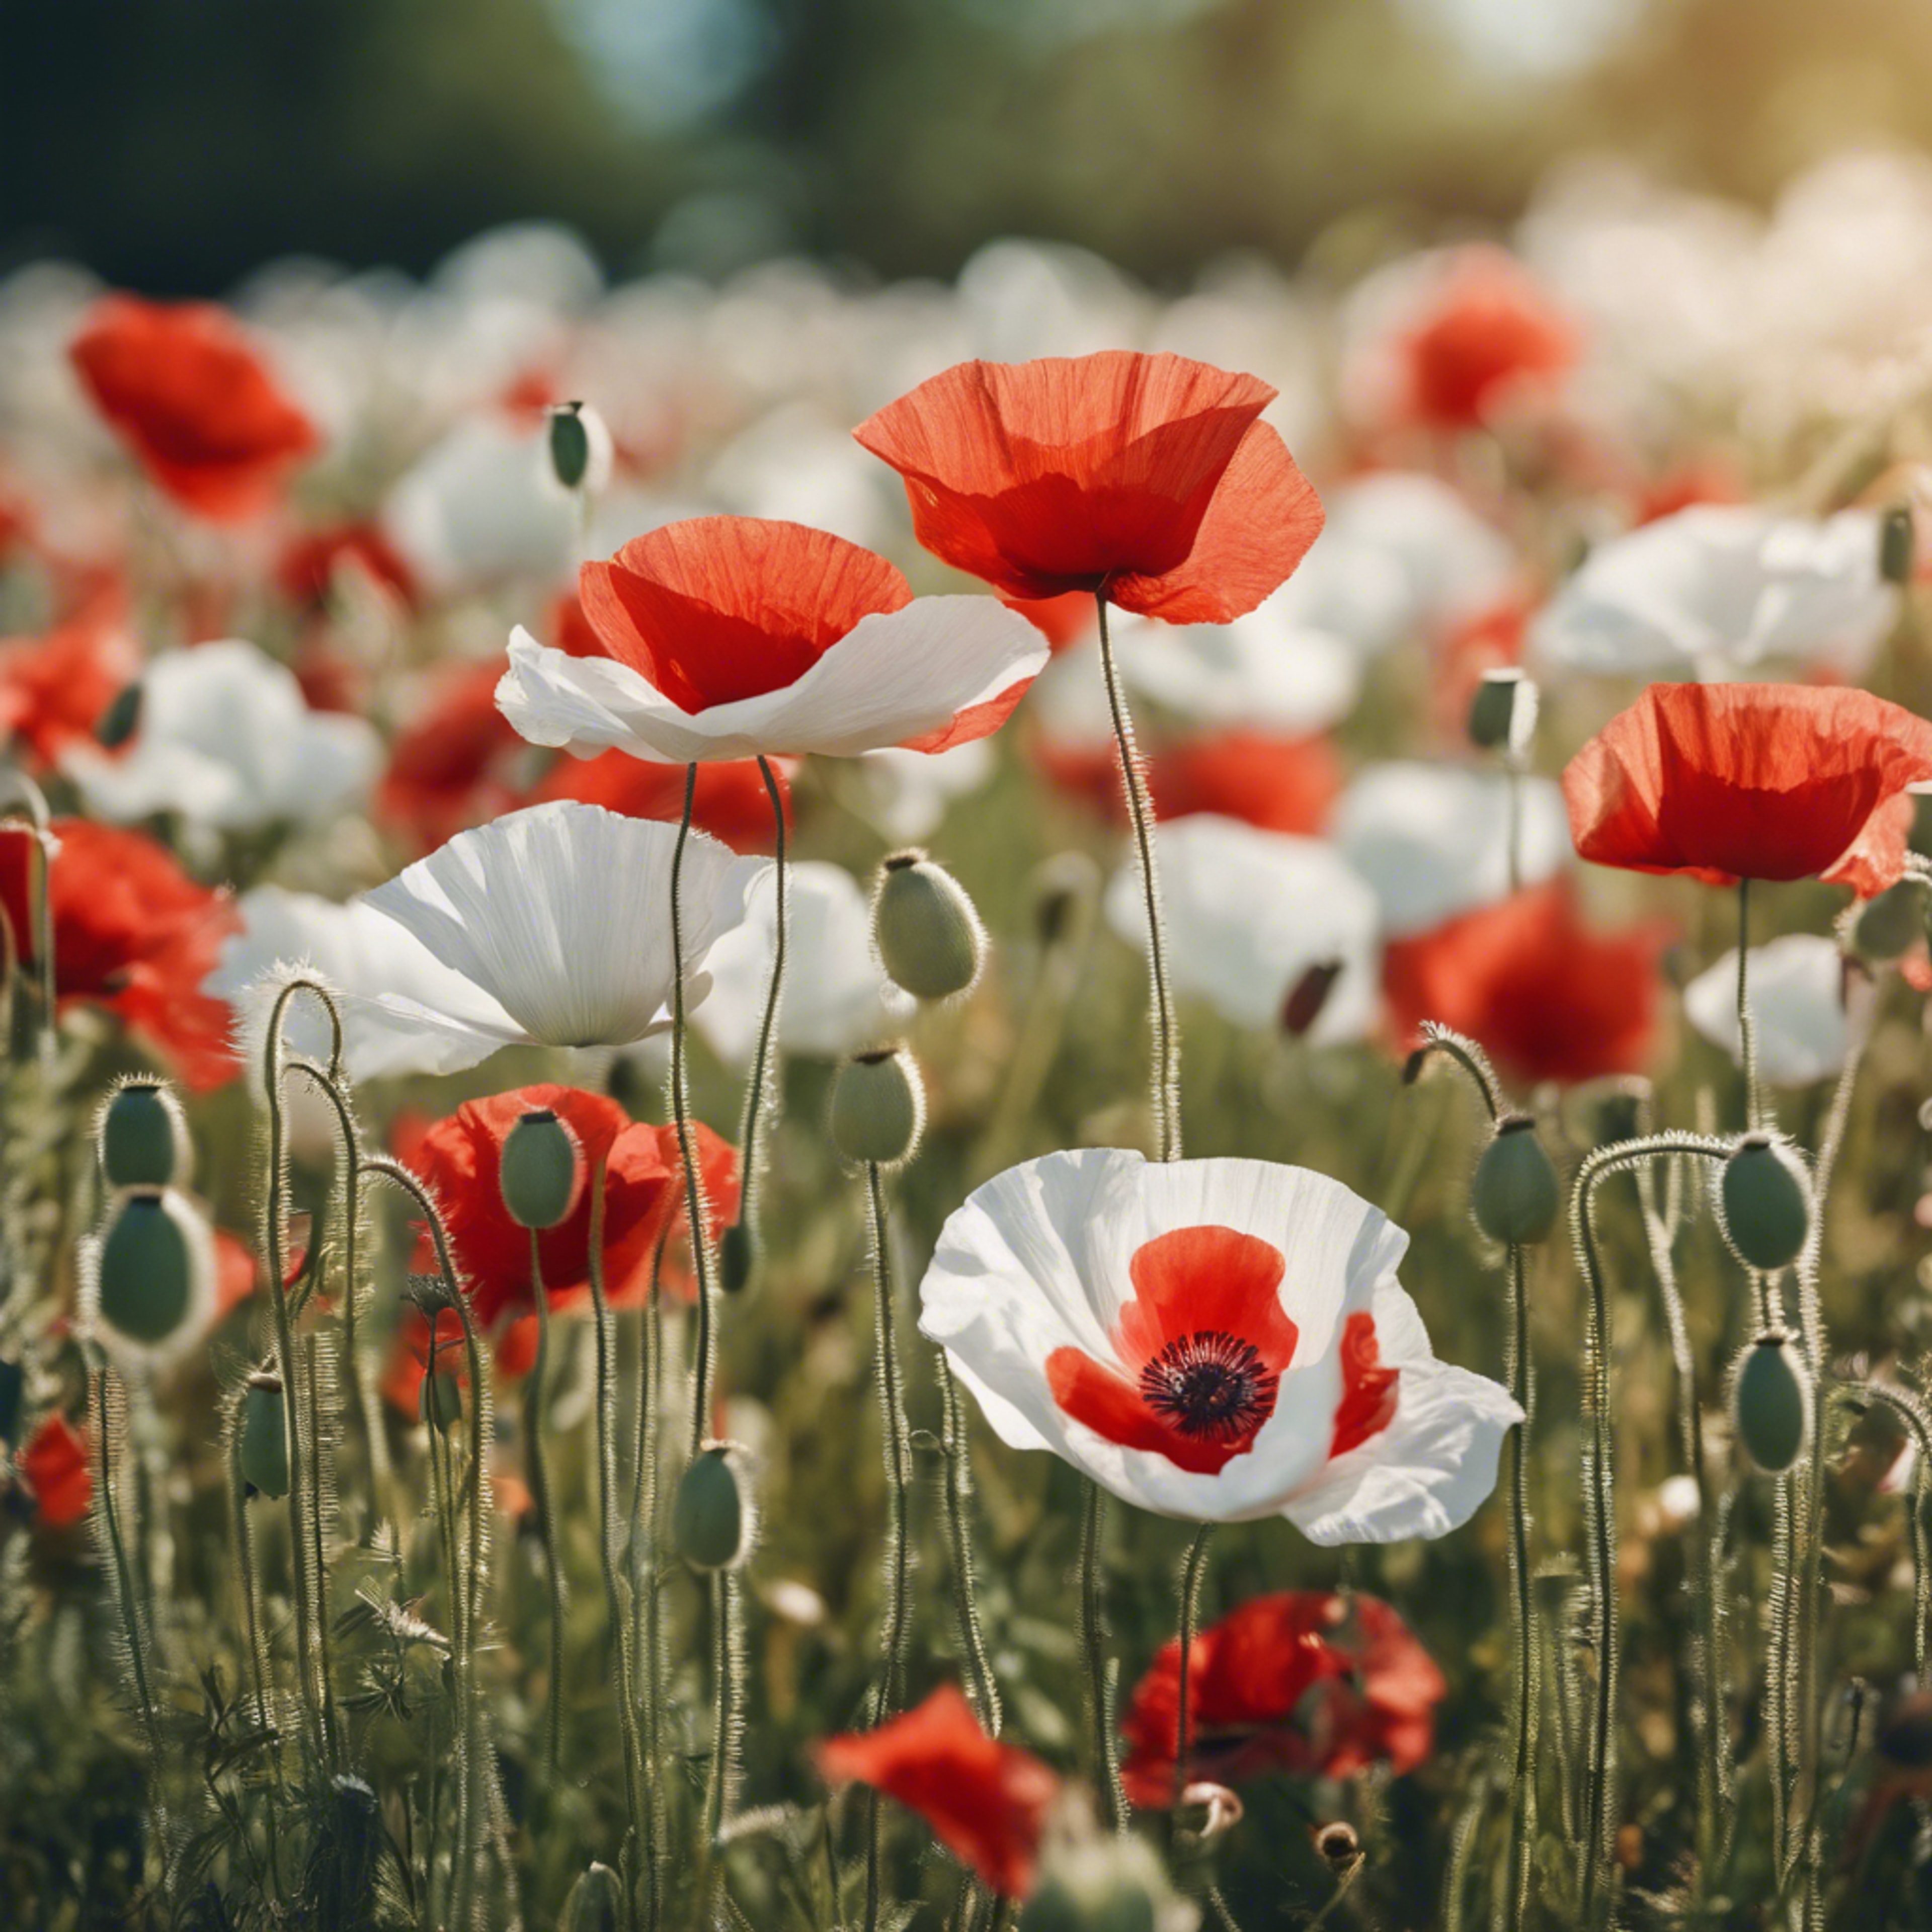 A patch of vibrant red and white poppy flowers in a summer meadow. Hintergrund[6e8905720b3f496680eb]